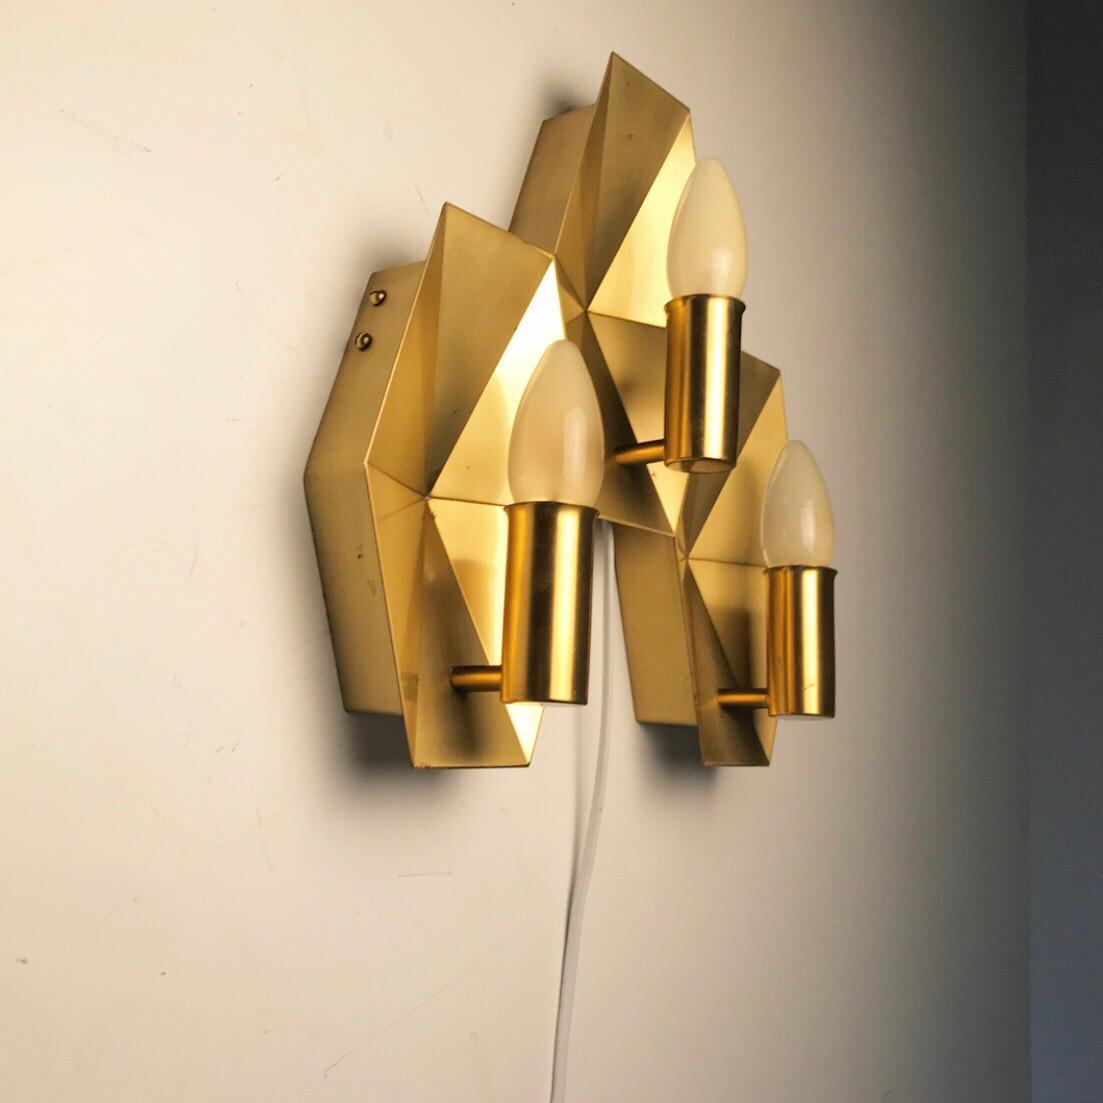 Danish Solid Brass Sconce by Rolf Graae for Fog & Mørup, Denmark, 1950s In Good Condition For Sale In Haderslev, DK